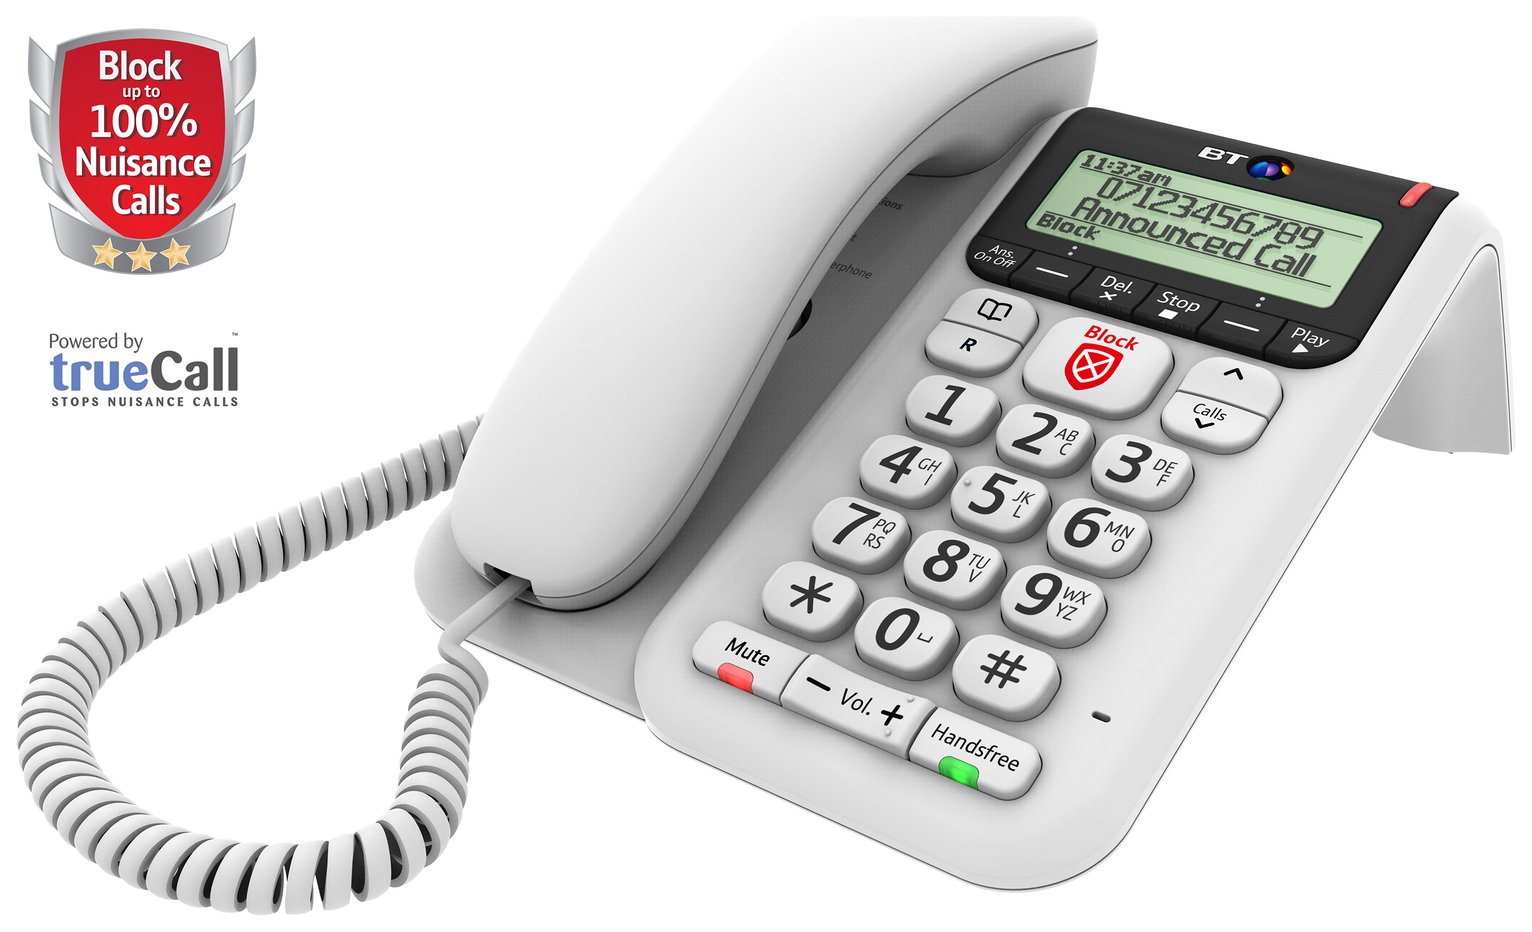 BT Decor 2600 Corded Telephone with Answer Machine Review